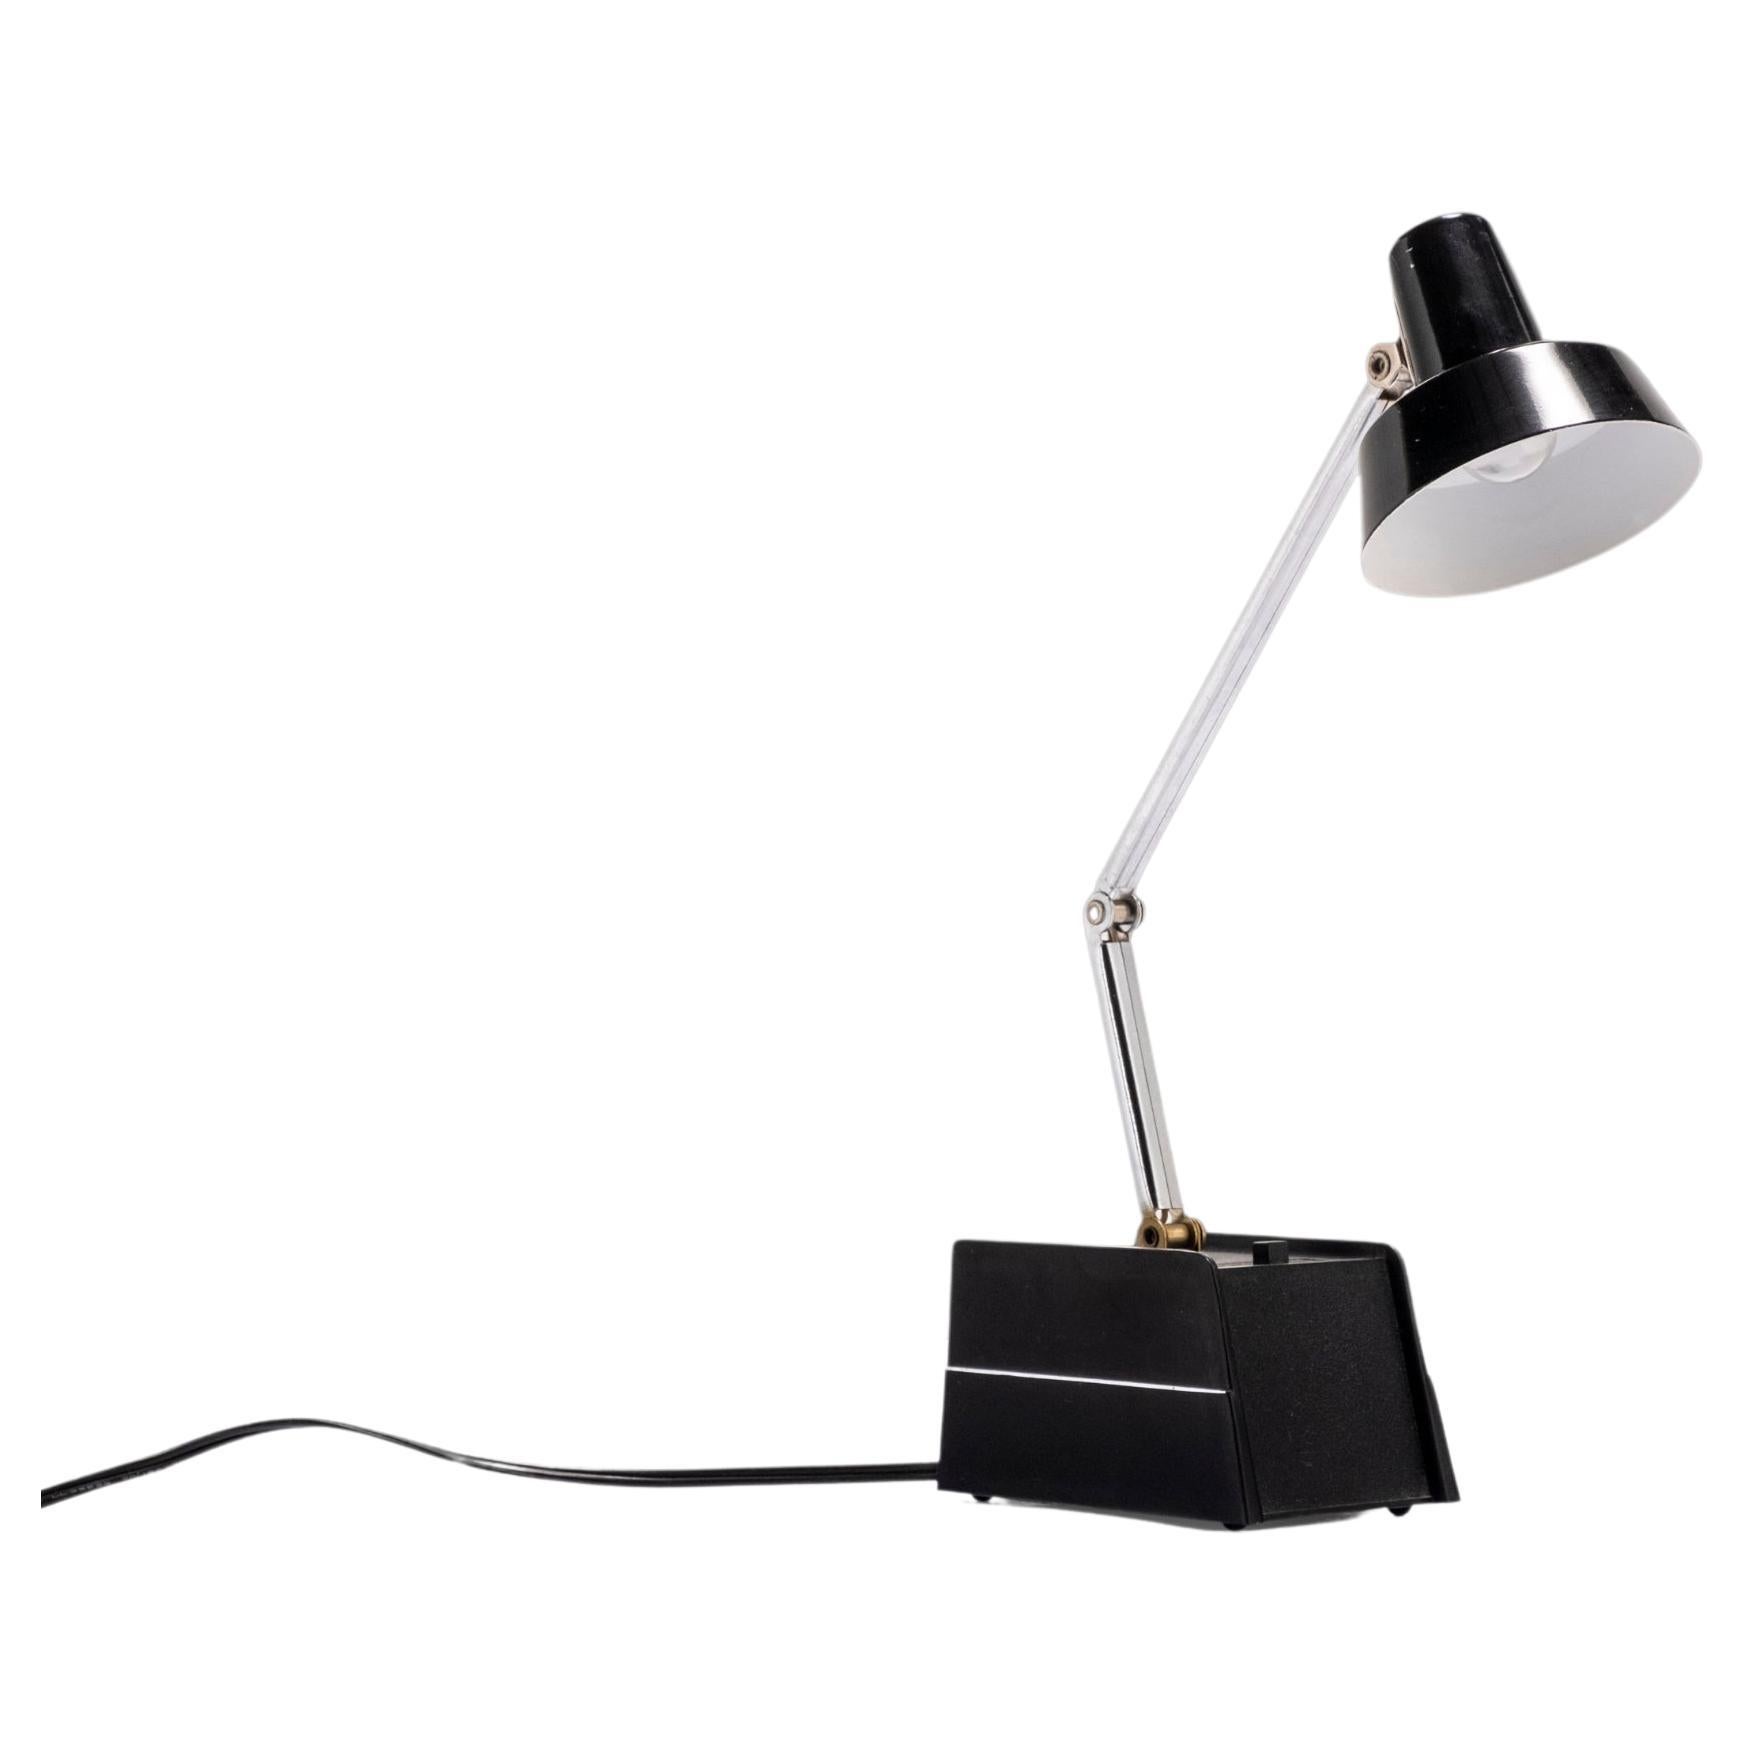 Mid-Century Modern Industrial Desk Lamp by Mobilite from NASA Offices, Taiwan